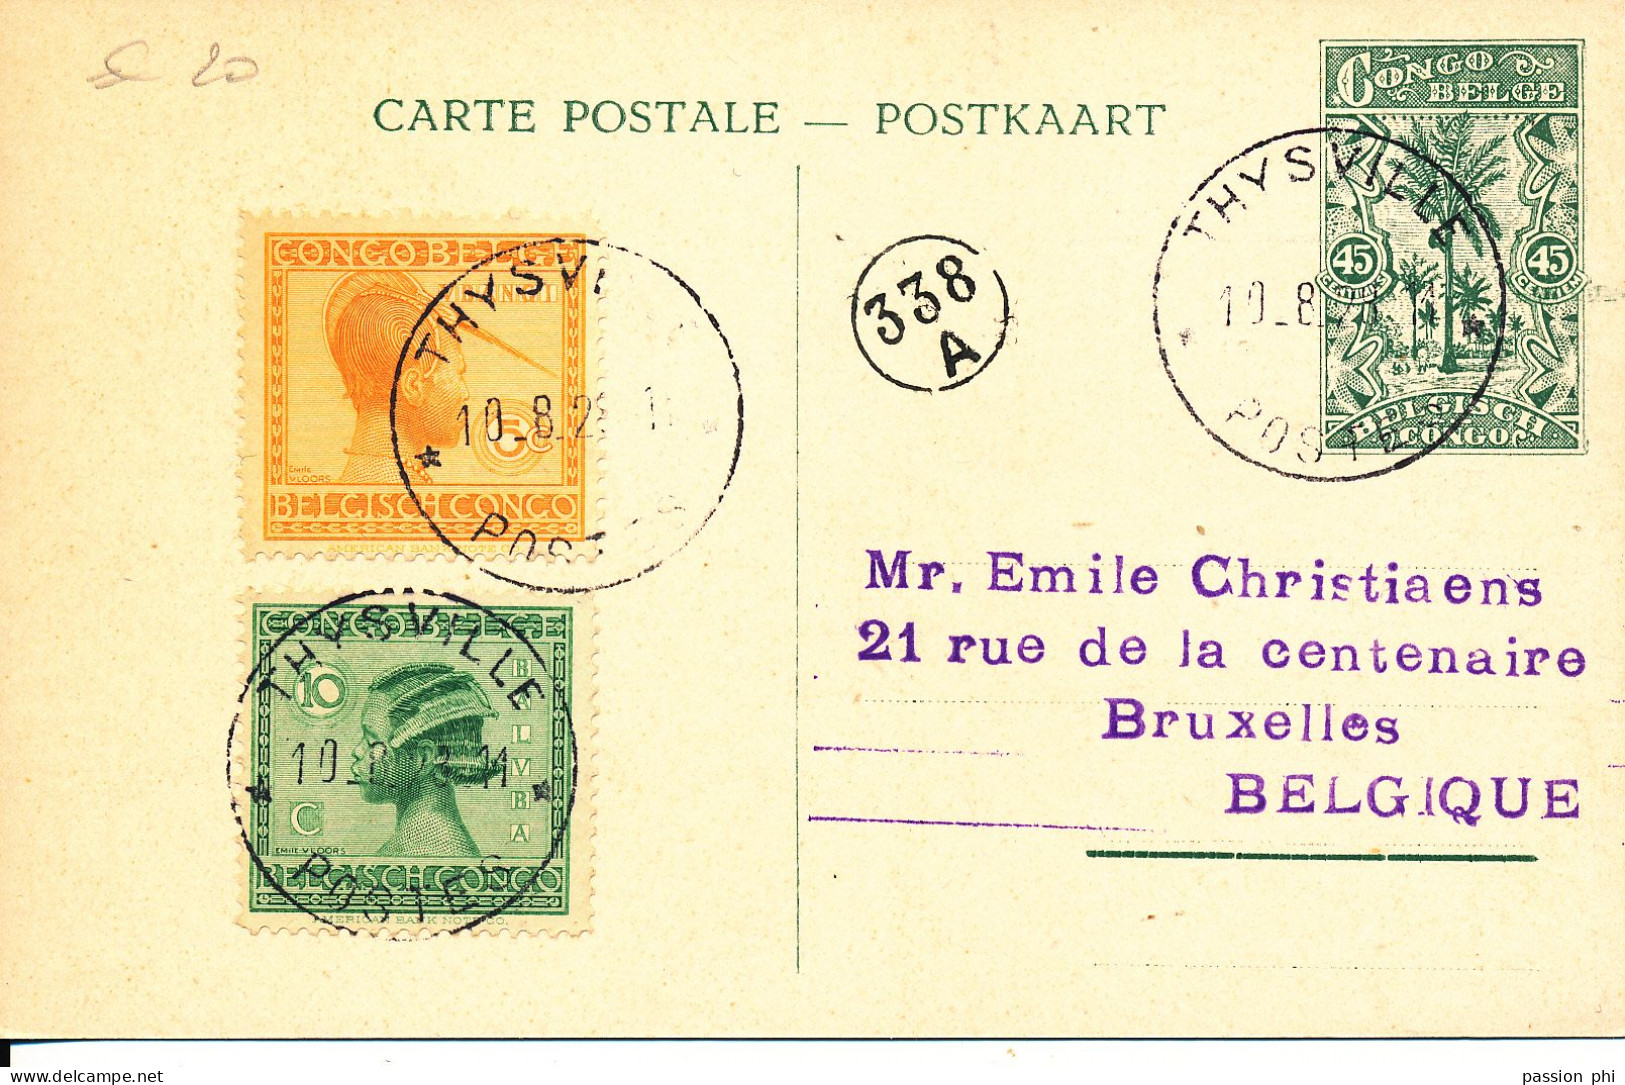 BELGIAN CONGO 1912 ISSUE PPS SBEP 66a VIEW 6 USED - Entiers Postaux